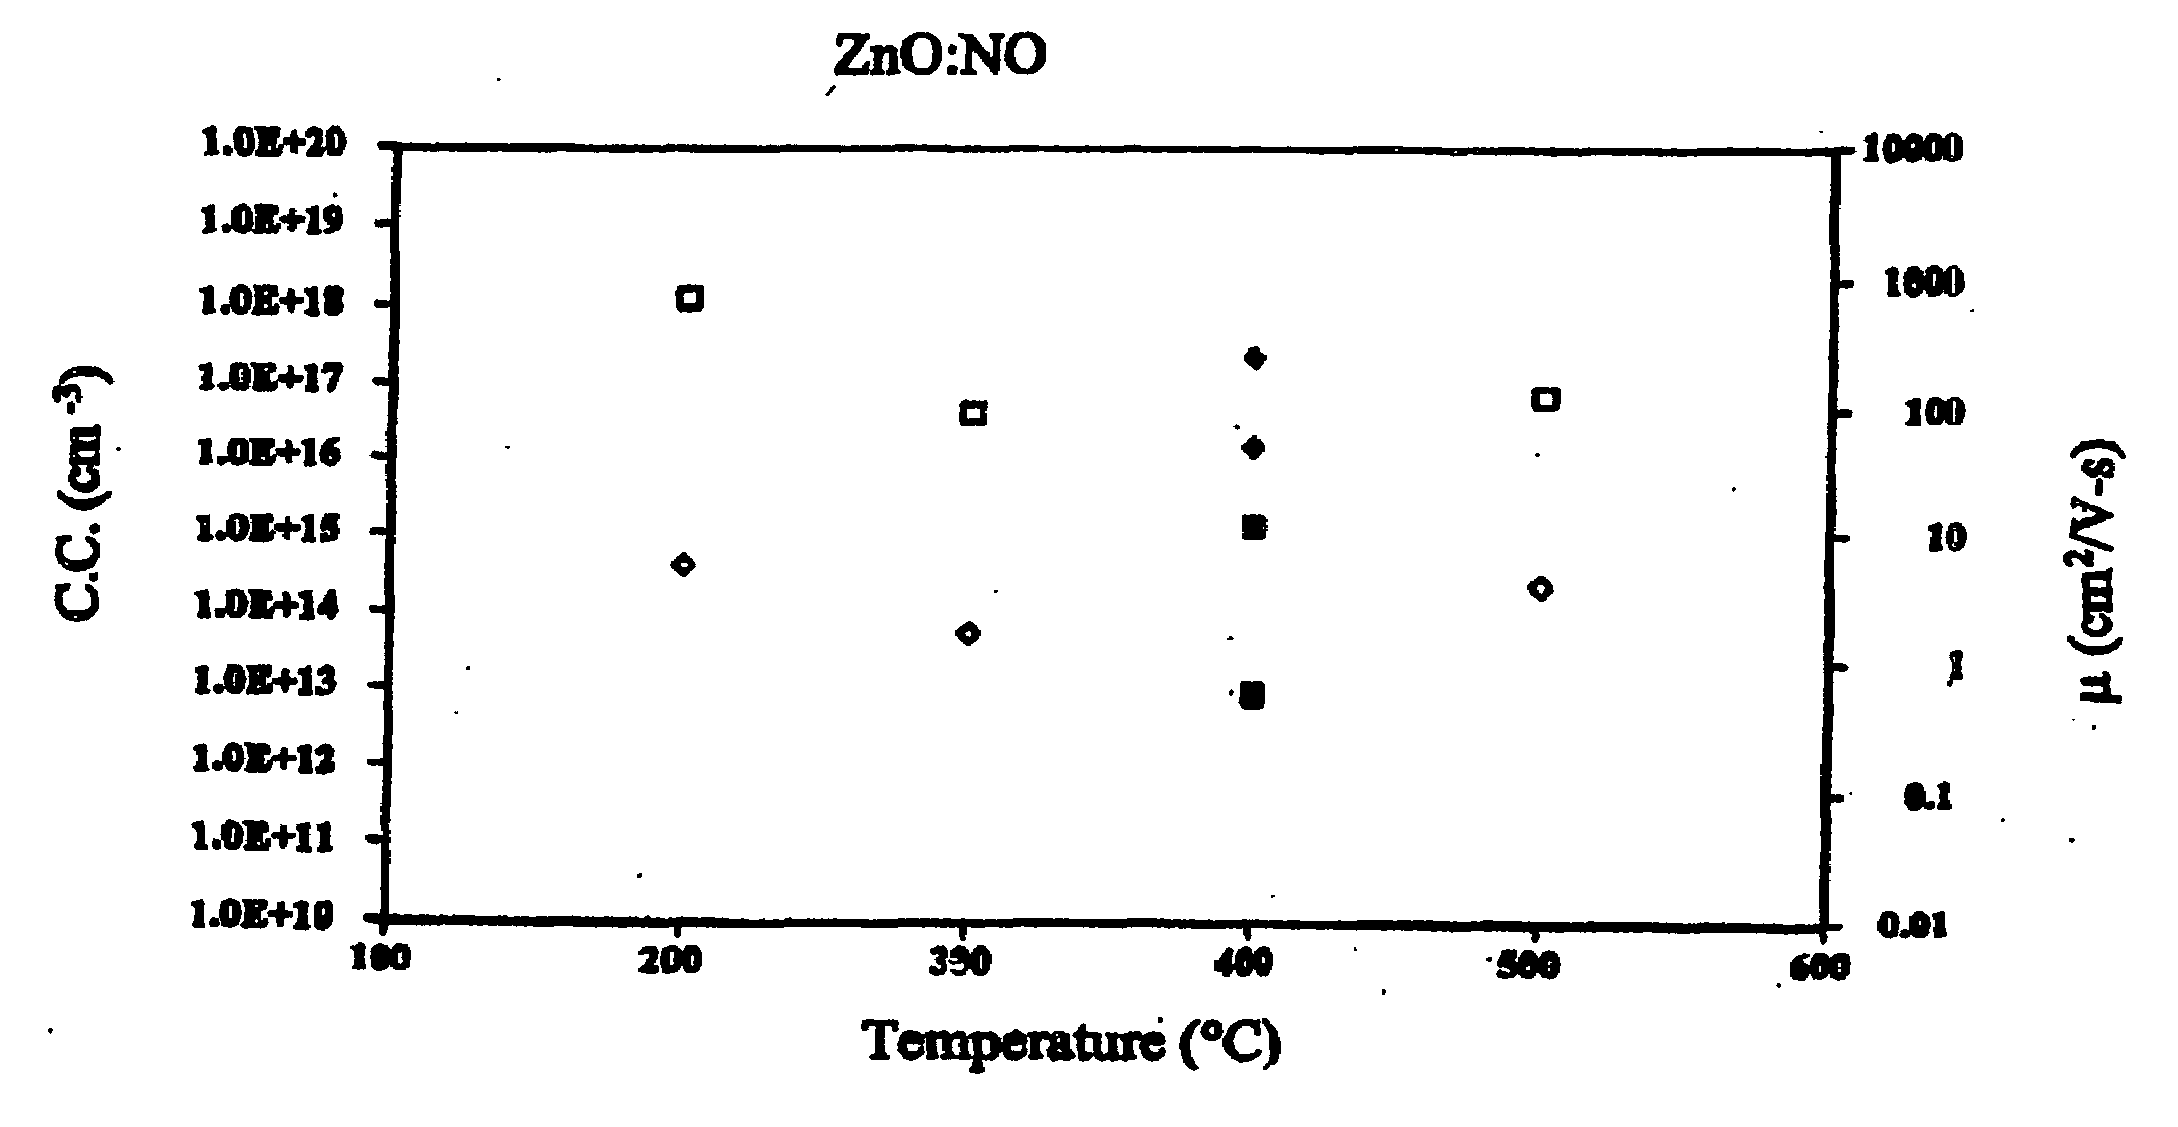 Method for Producing High Carrier Concentration P-Type Transparent Conducting Oxides